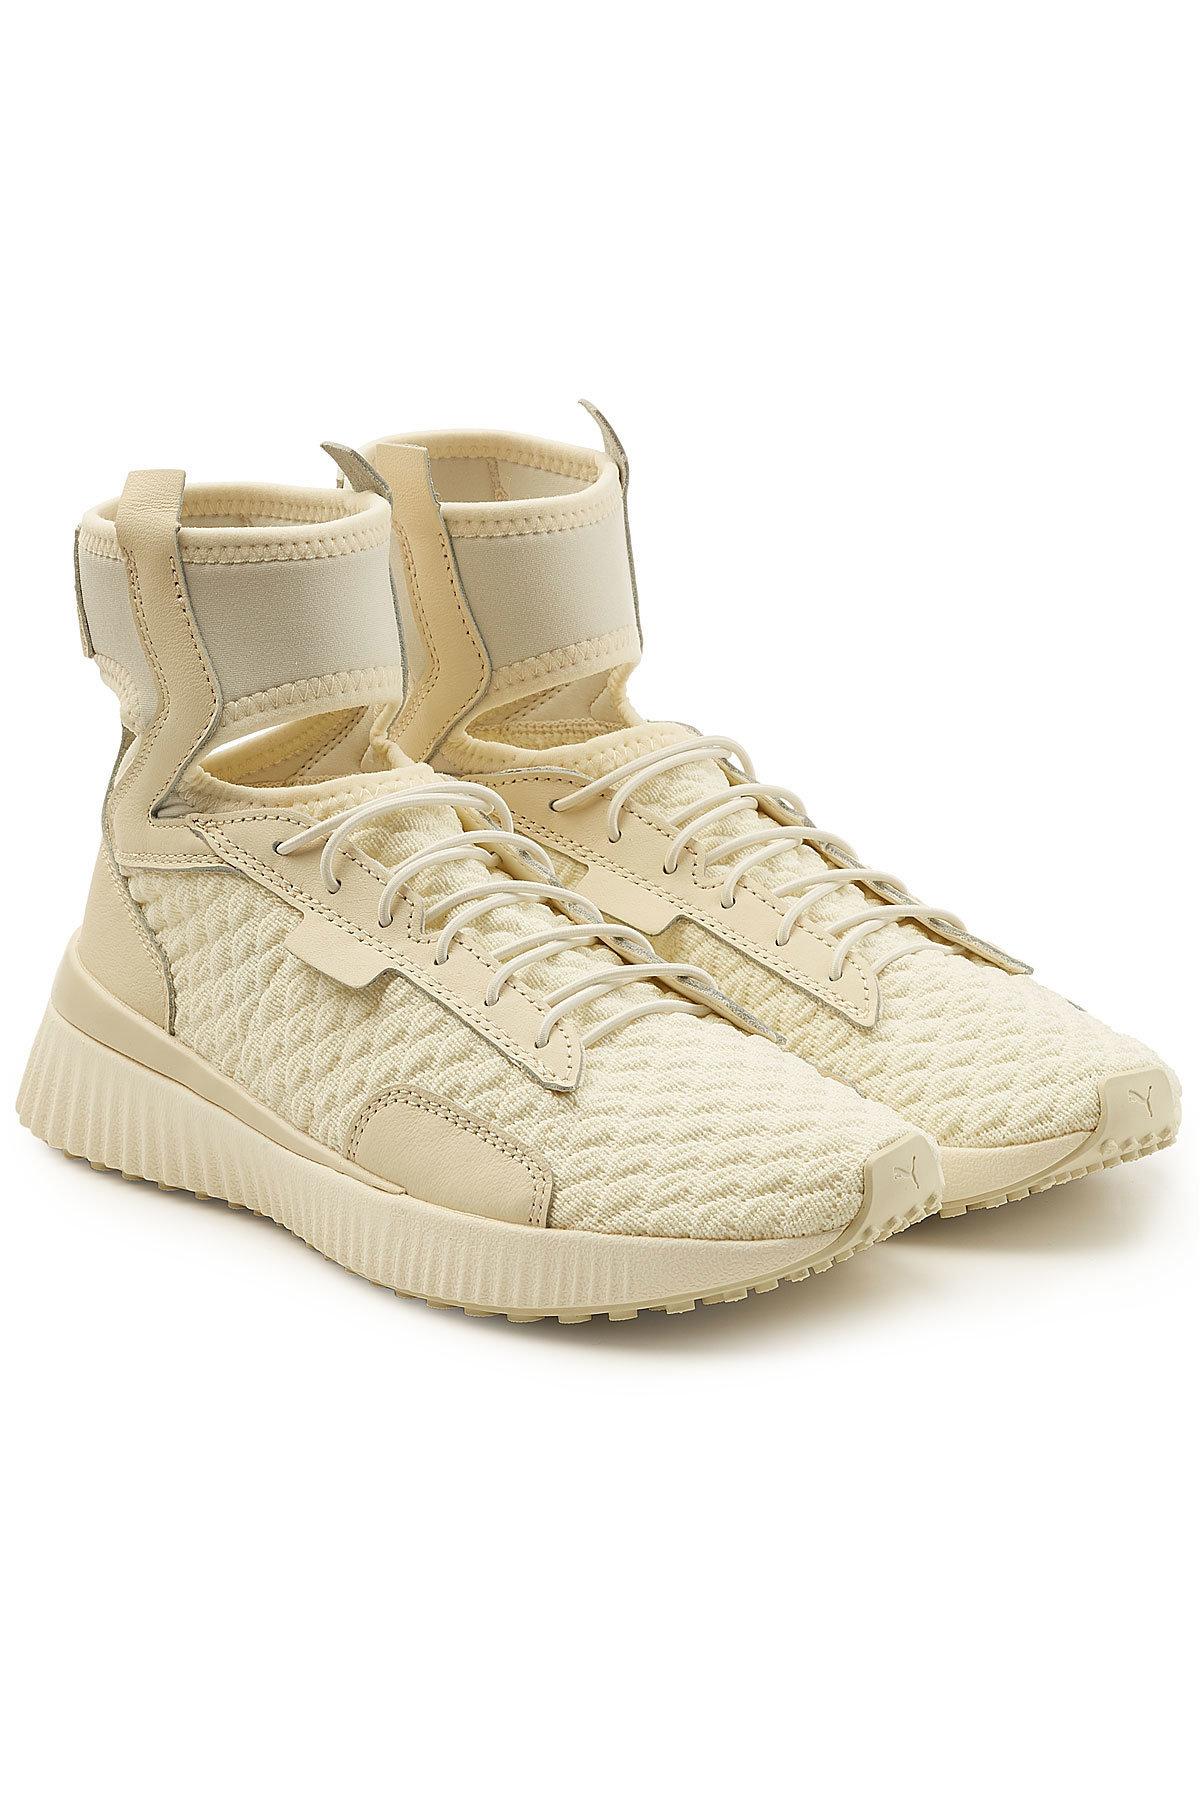 Fenty X Puma Leather High Top Sneakers 